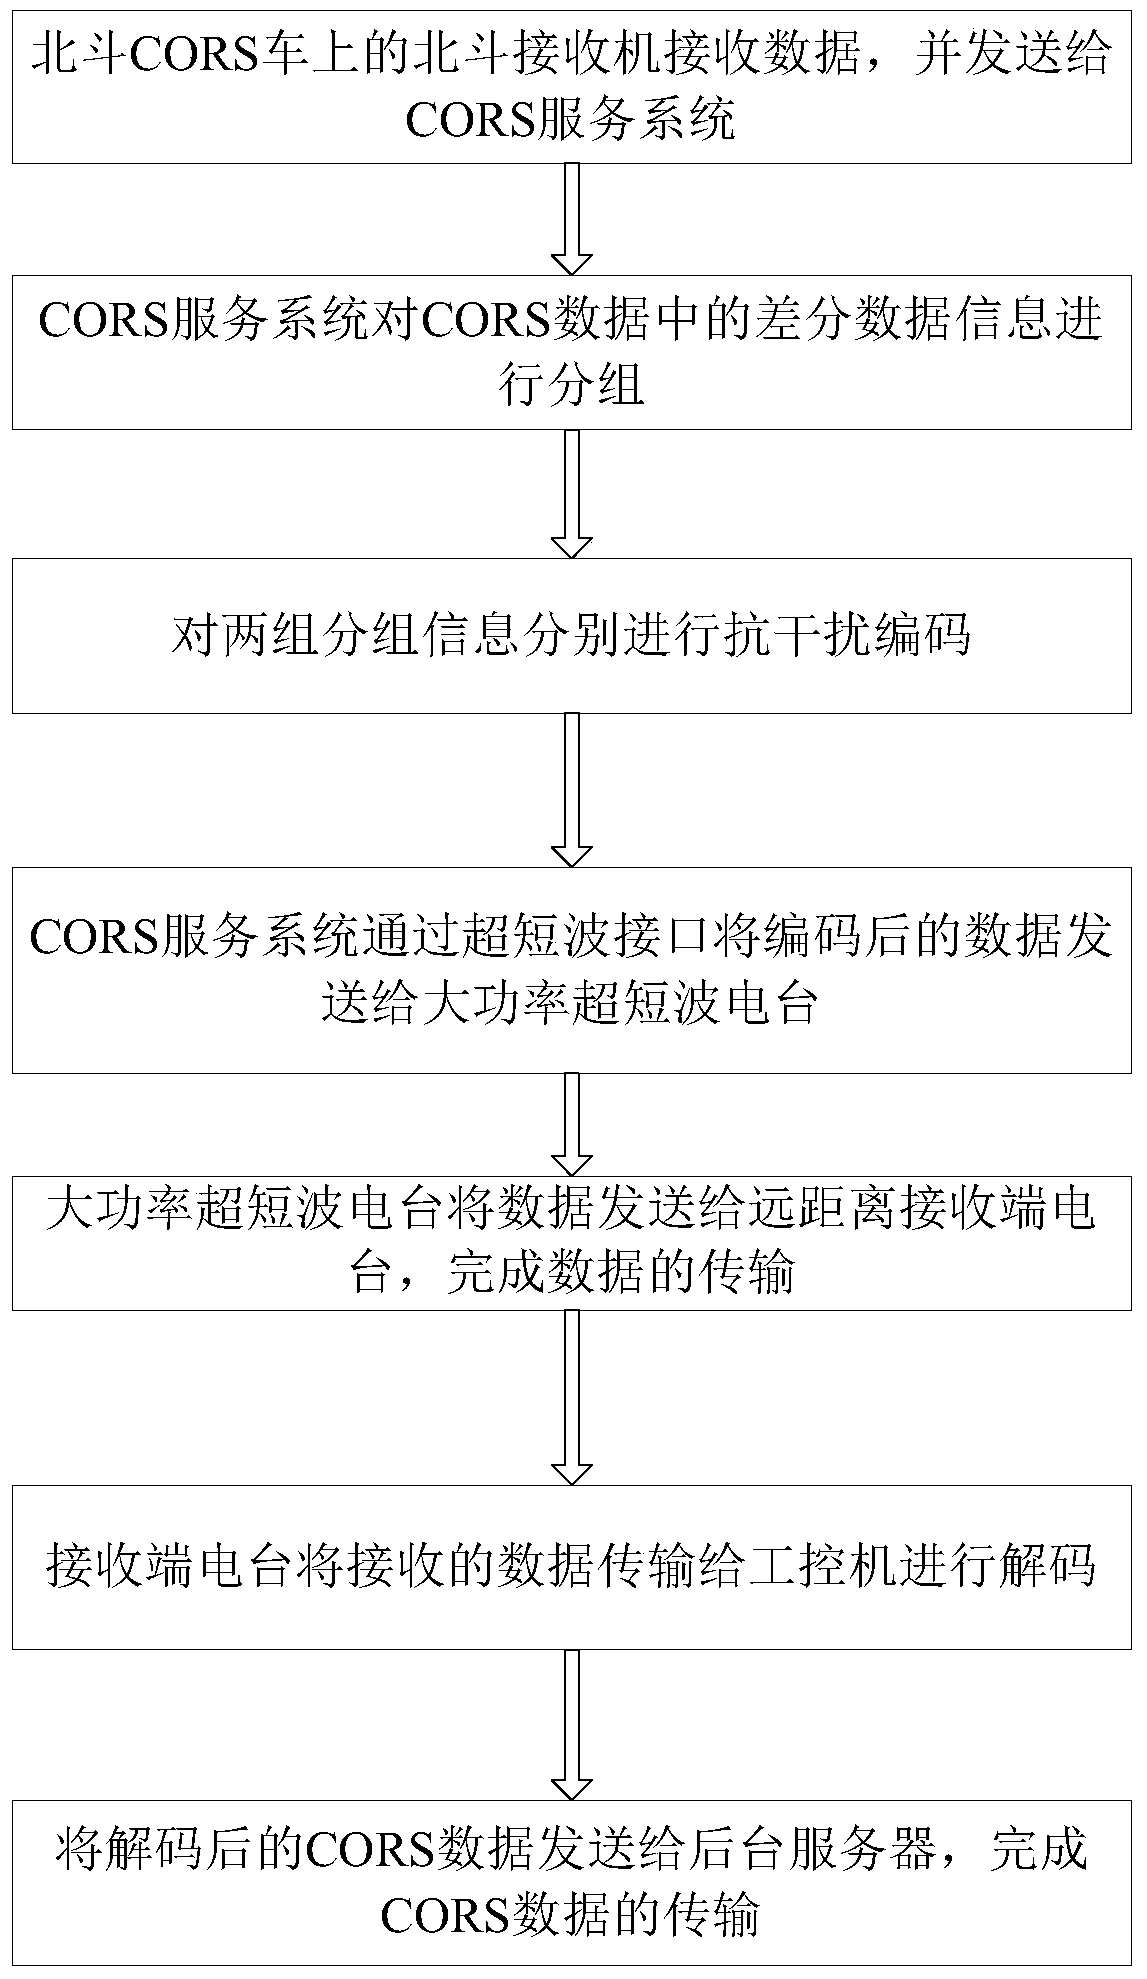 A CORS data coding transmission method suitable for long-distance communication